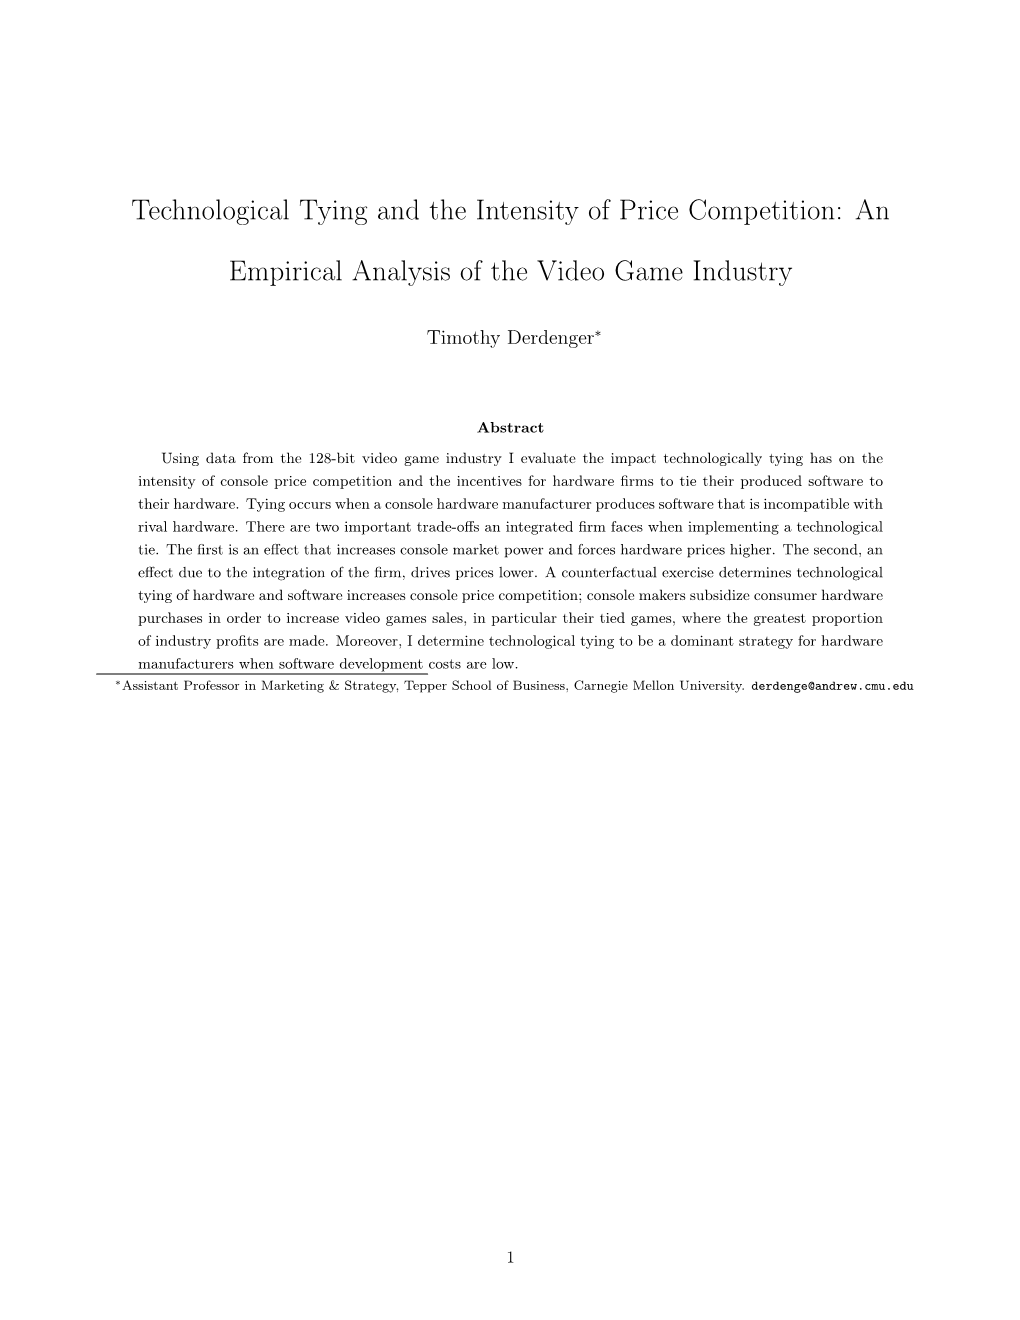 Technological Tying and the Intensity of Price Competition: an Empirical